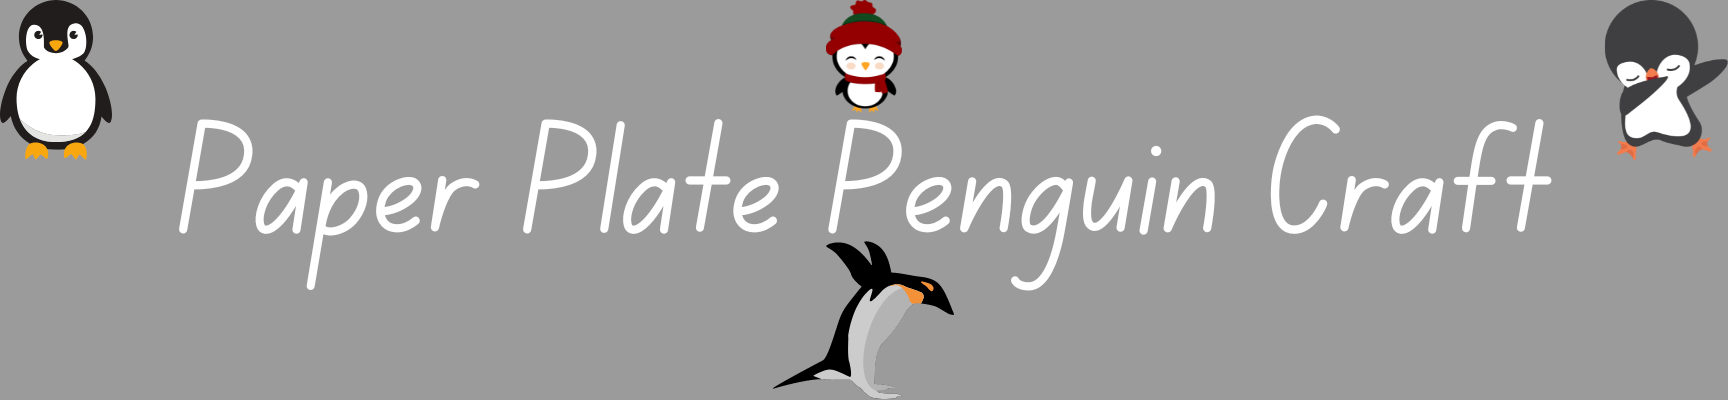 How to Create a Paper Plate Penguin Craft